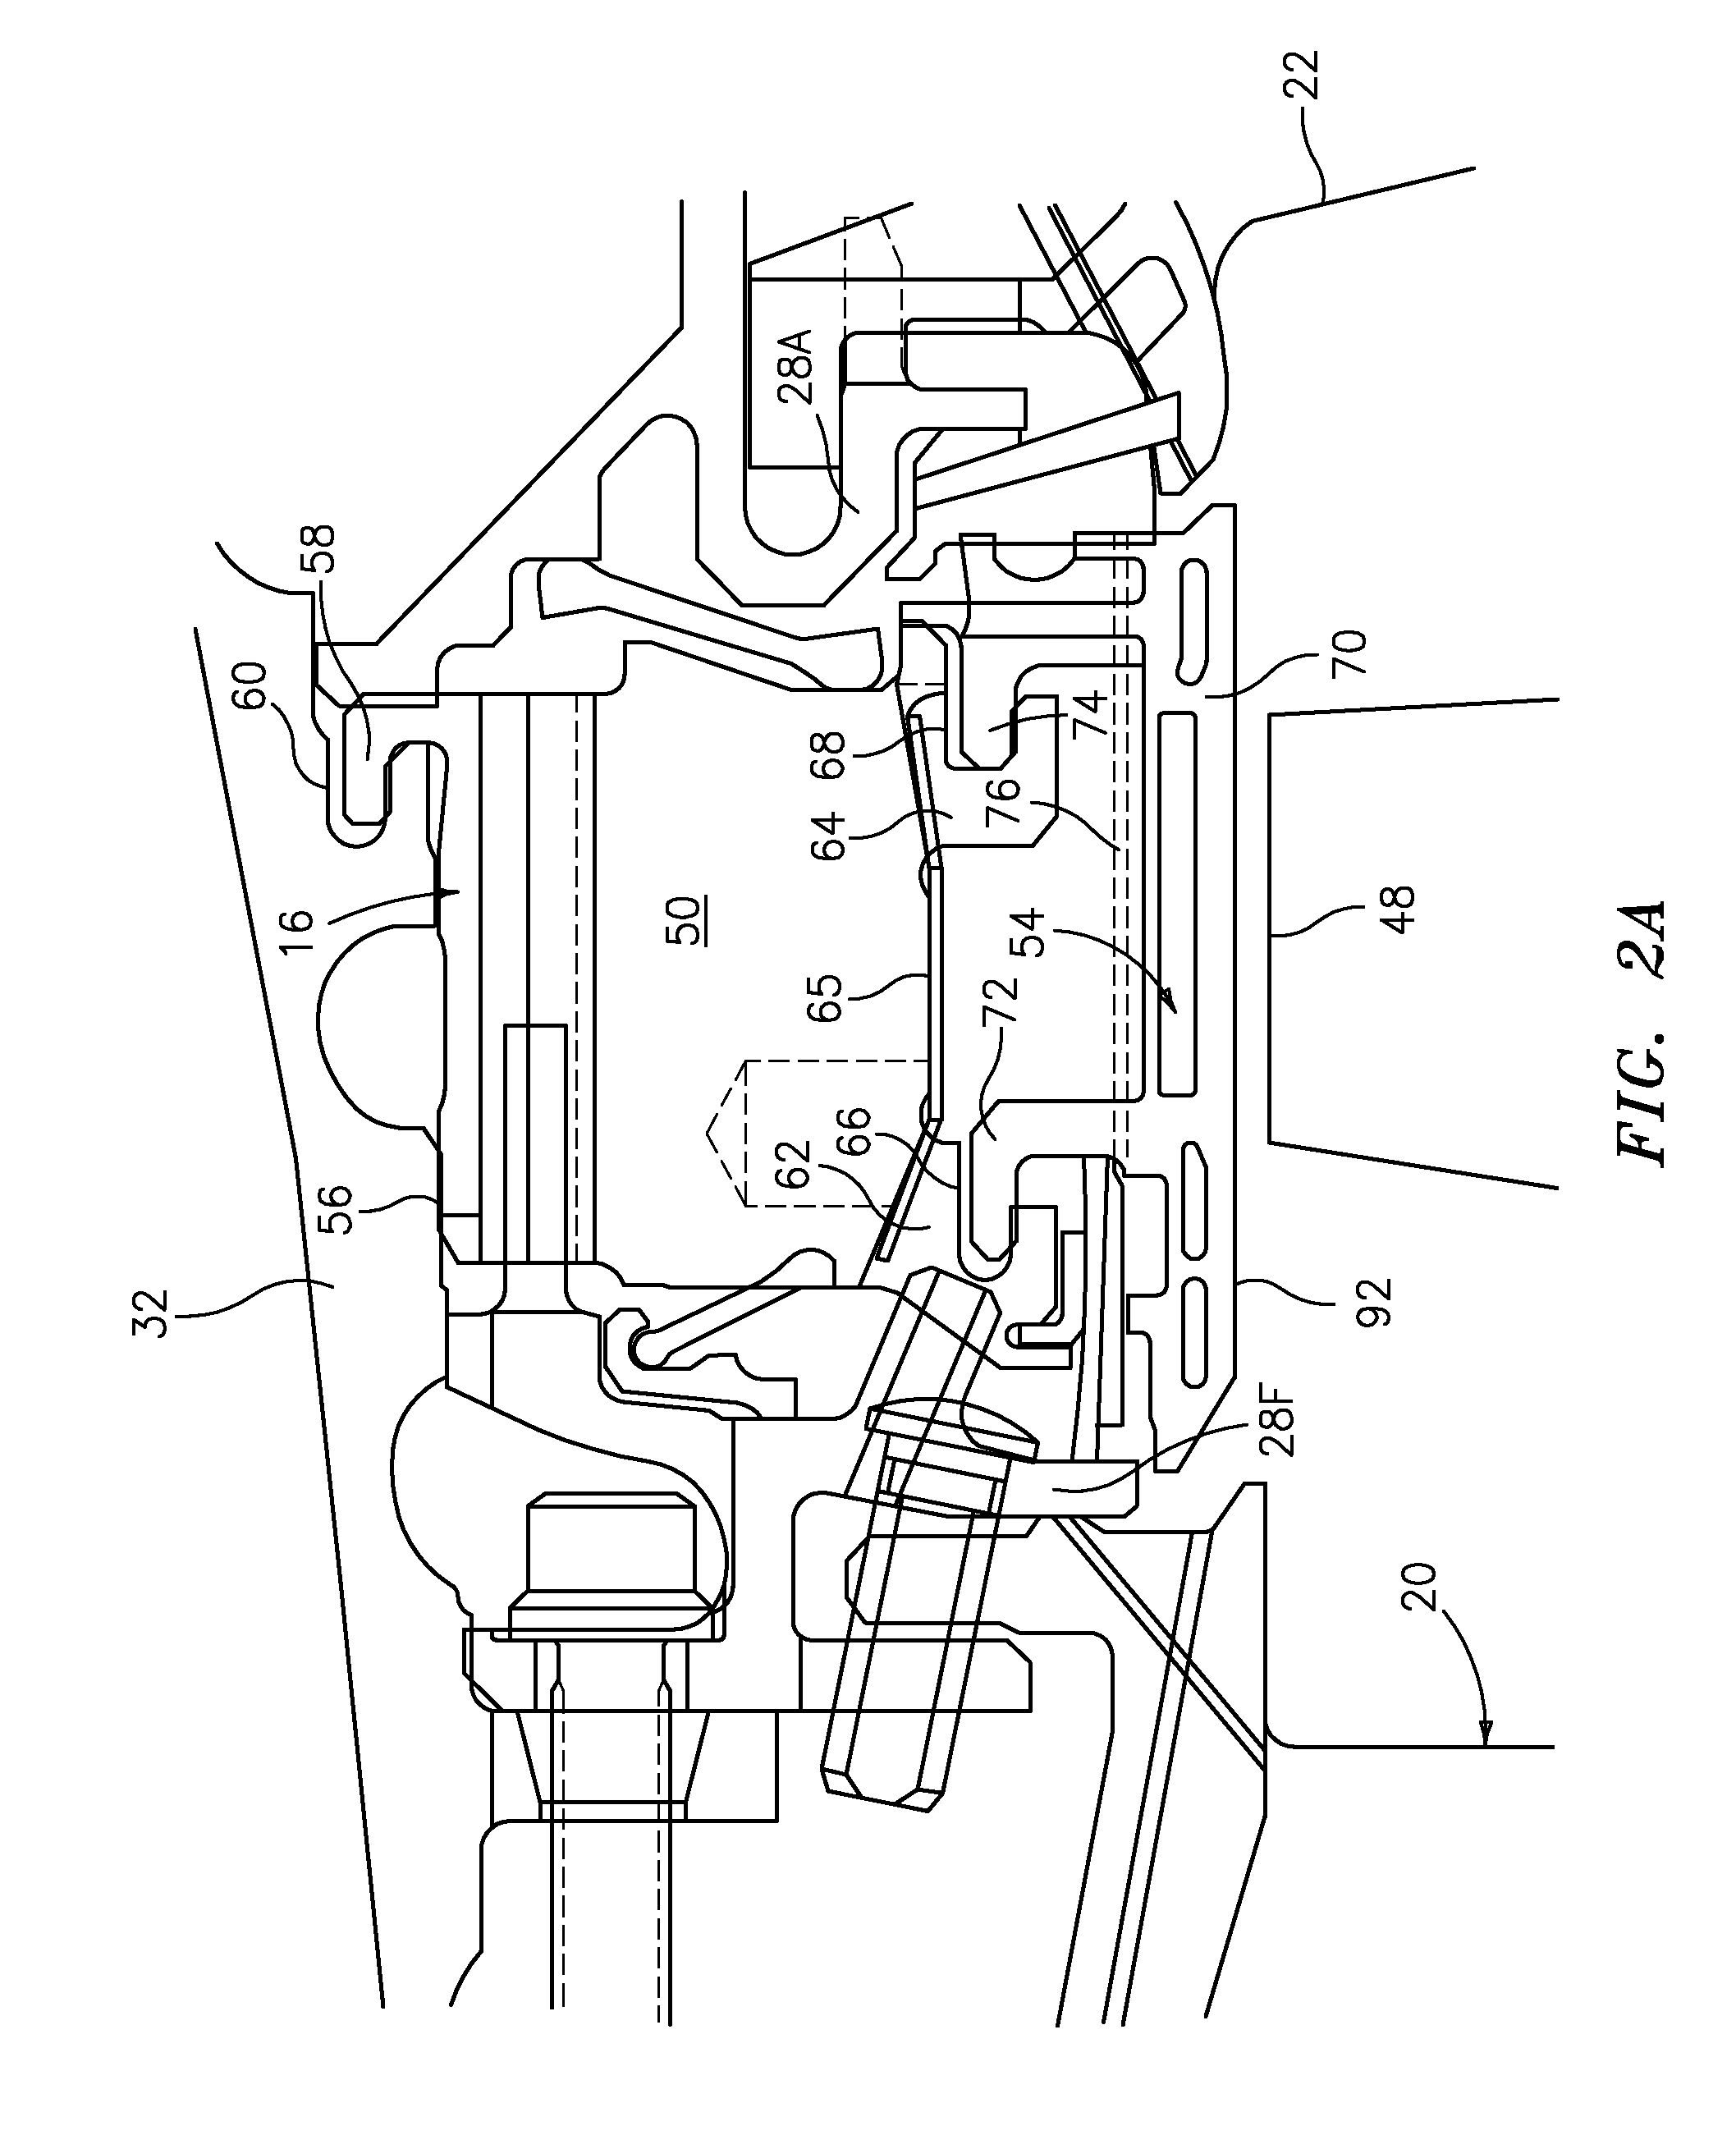 Blade outer air seal for a gas turbine engine